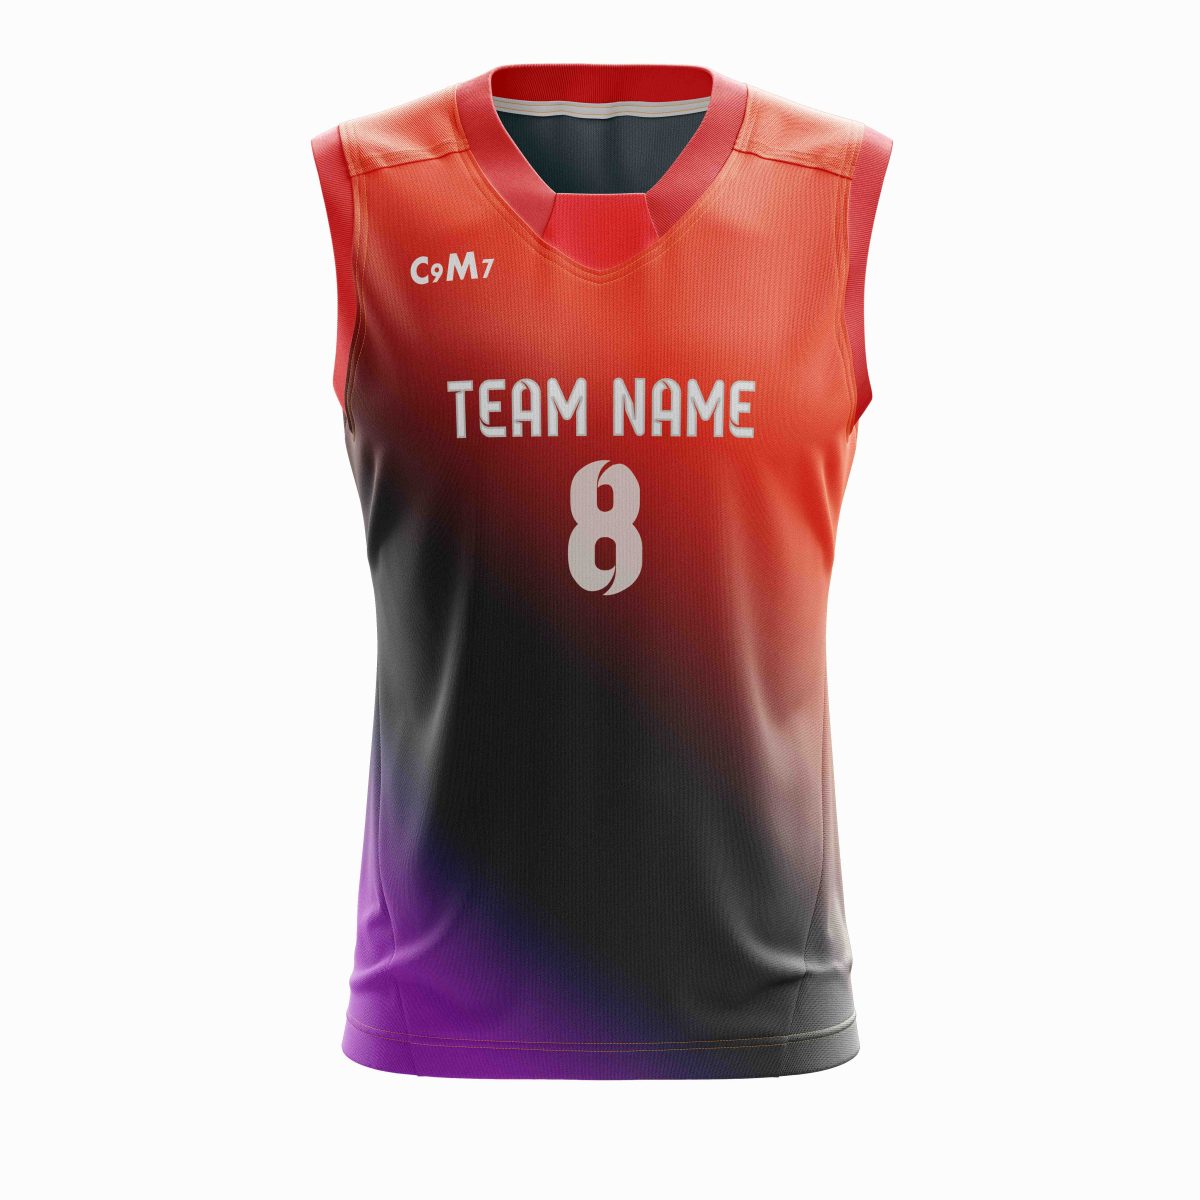 Cool Oztag Jersey